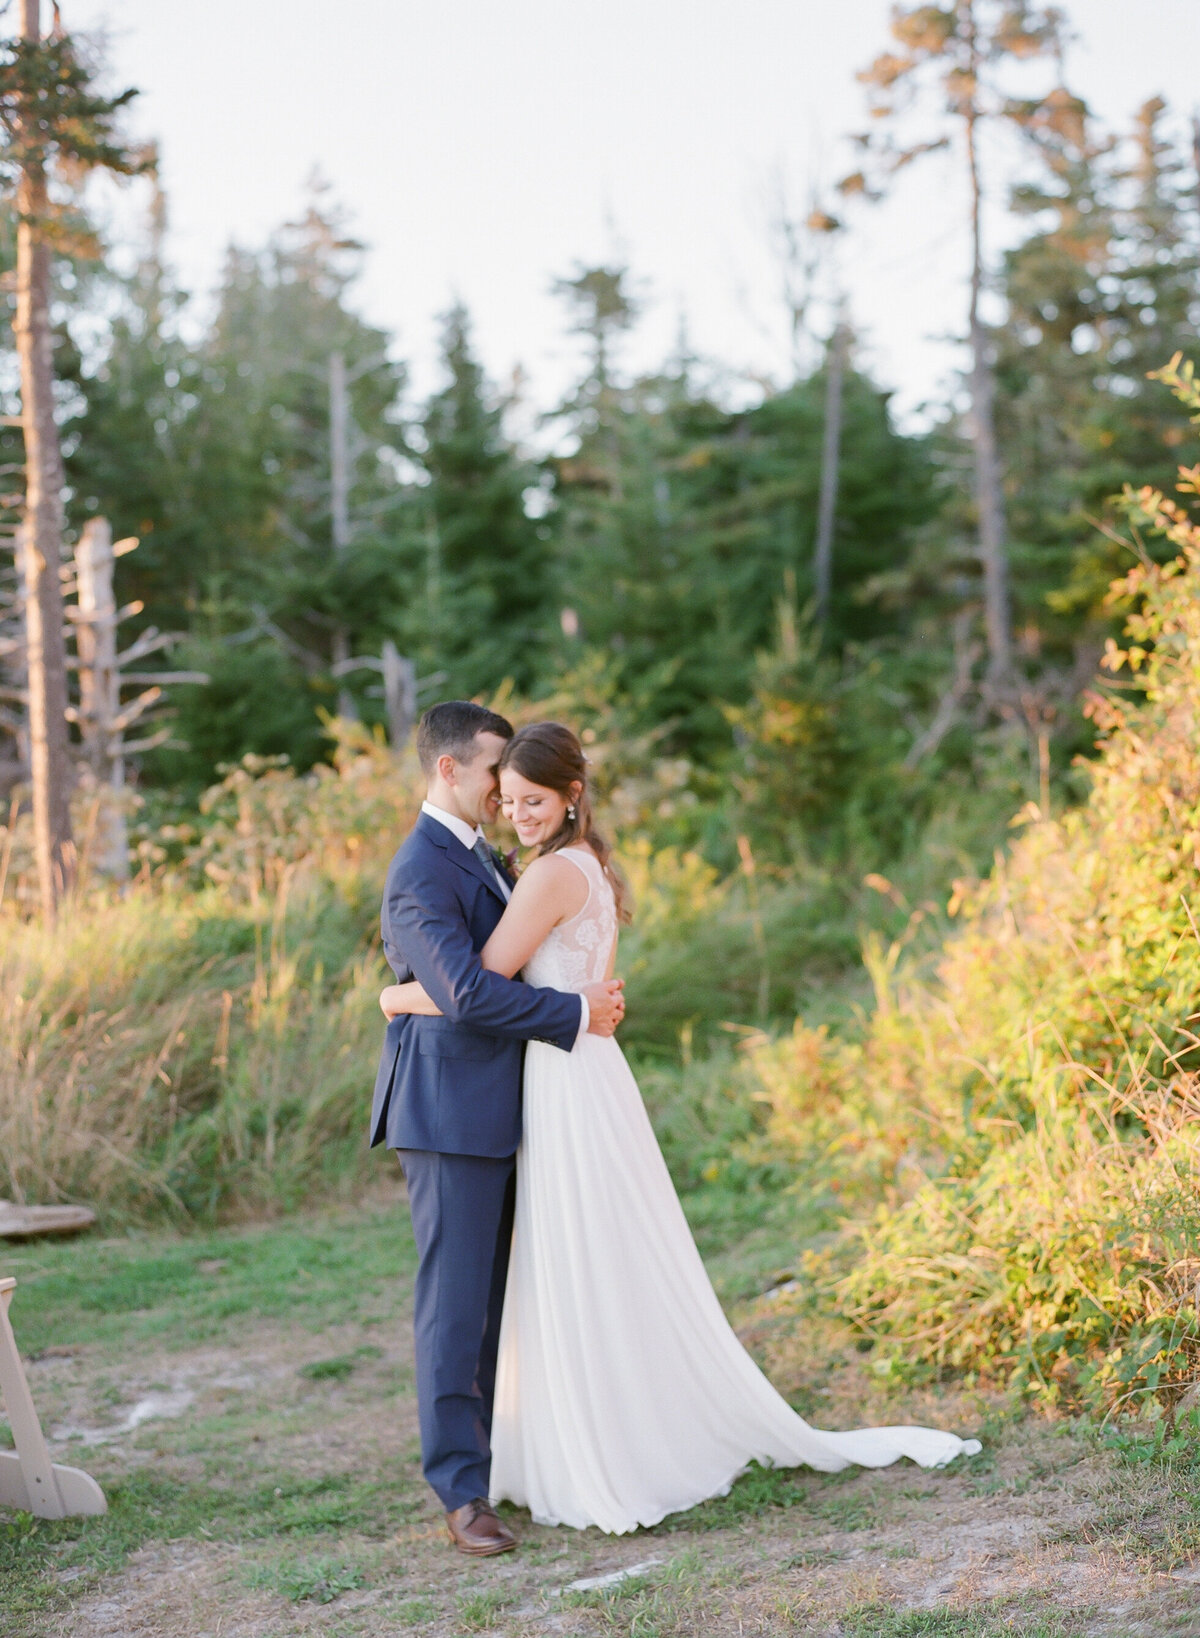 Jacqueline Anne Photography - Halifax Wedding Photographer - Jaclyn and Morgan-75